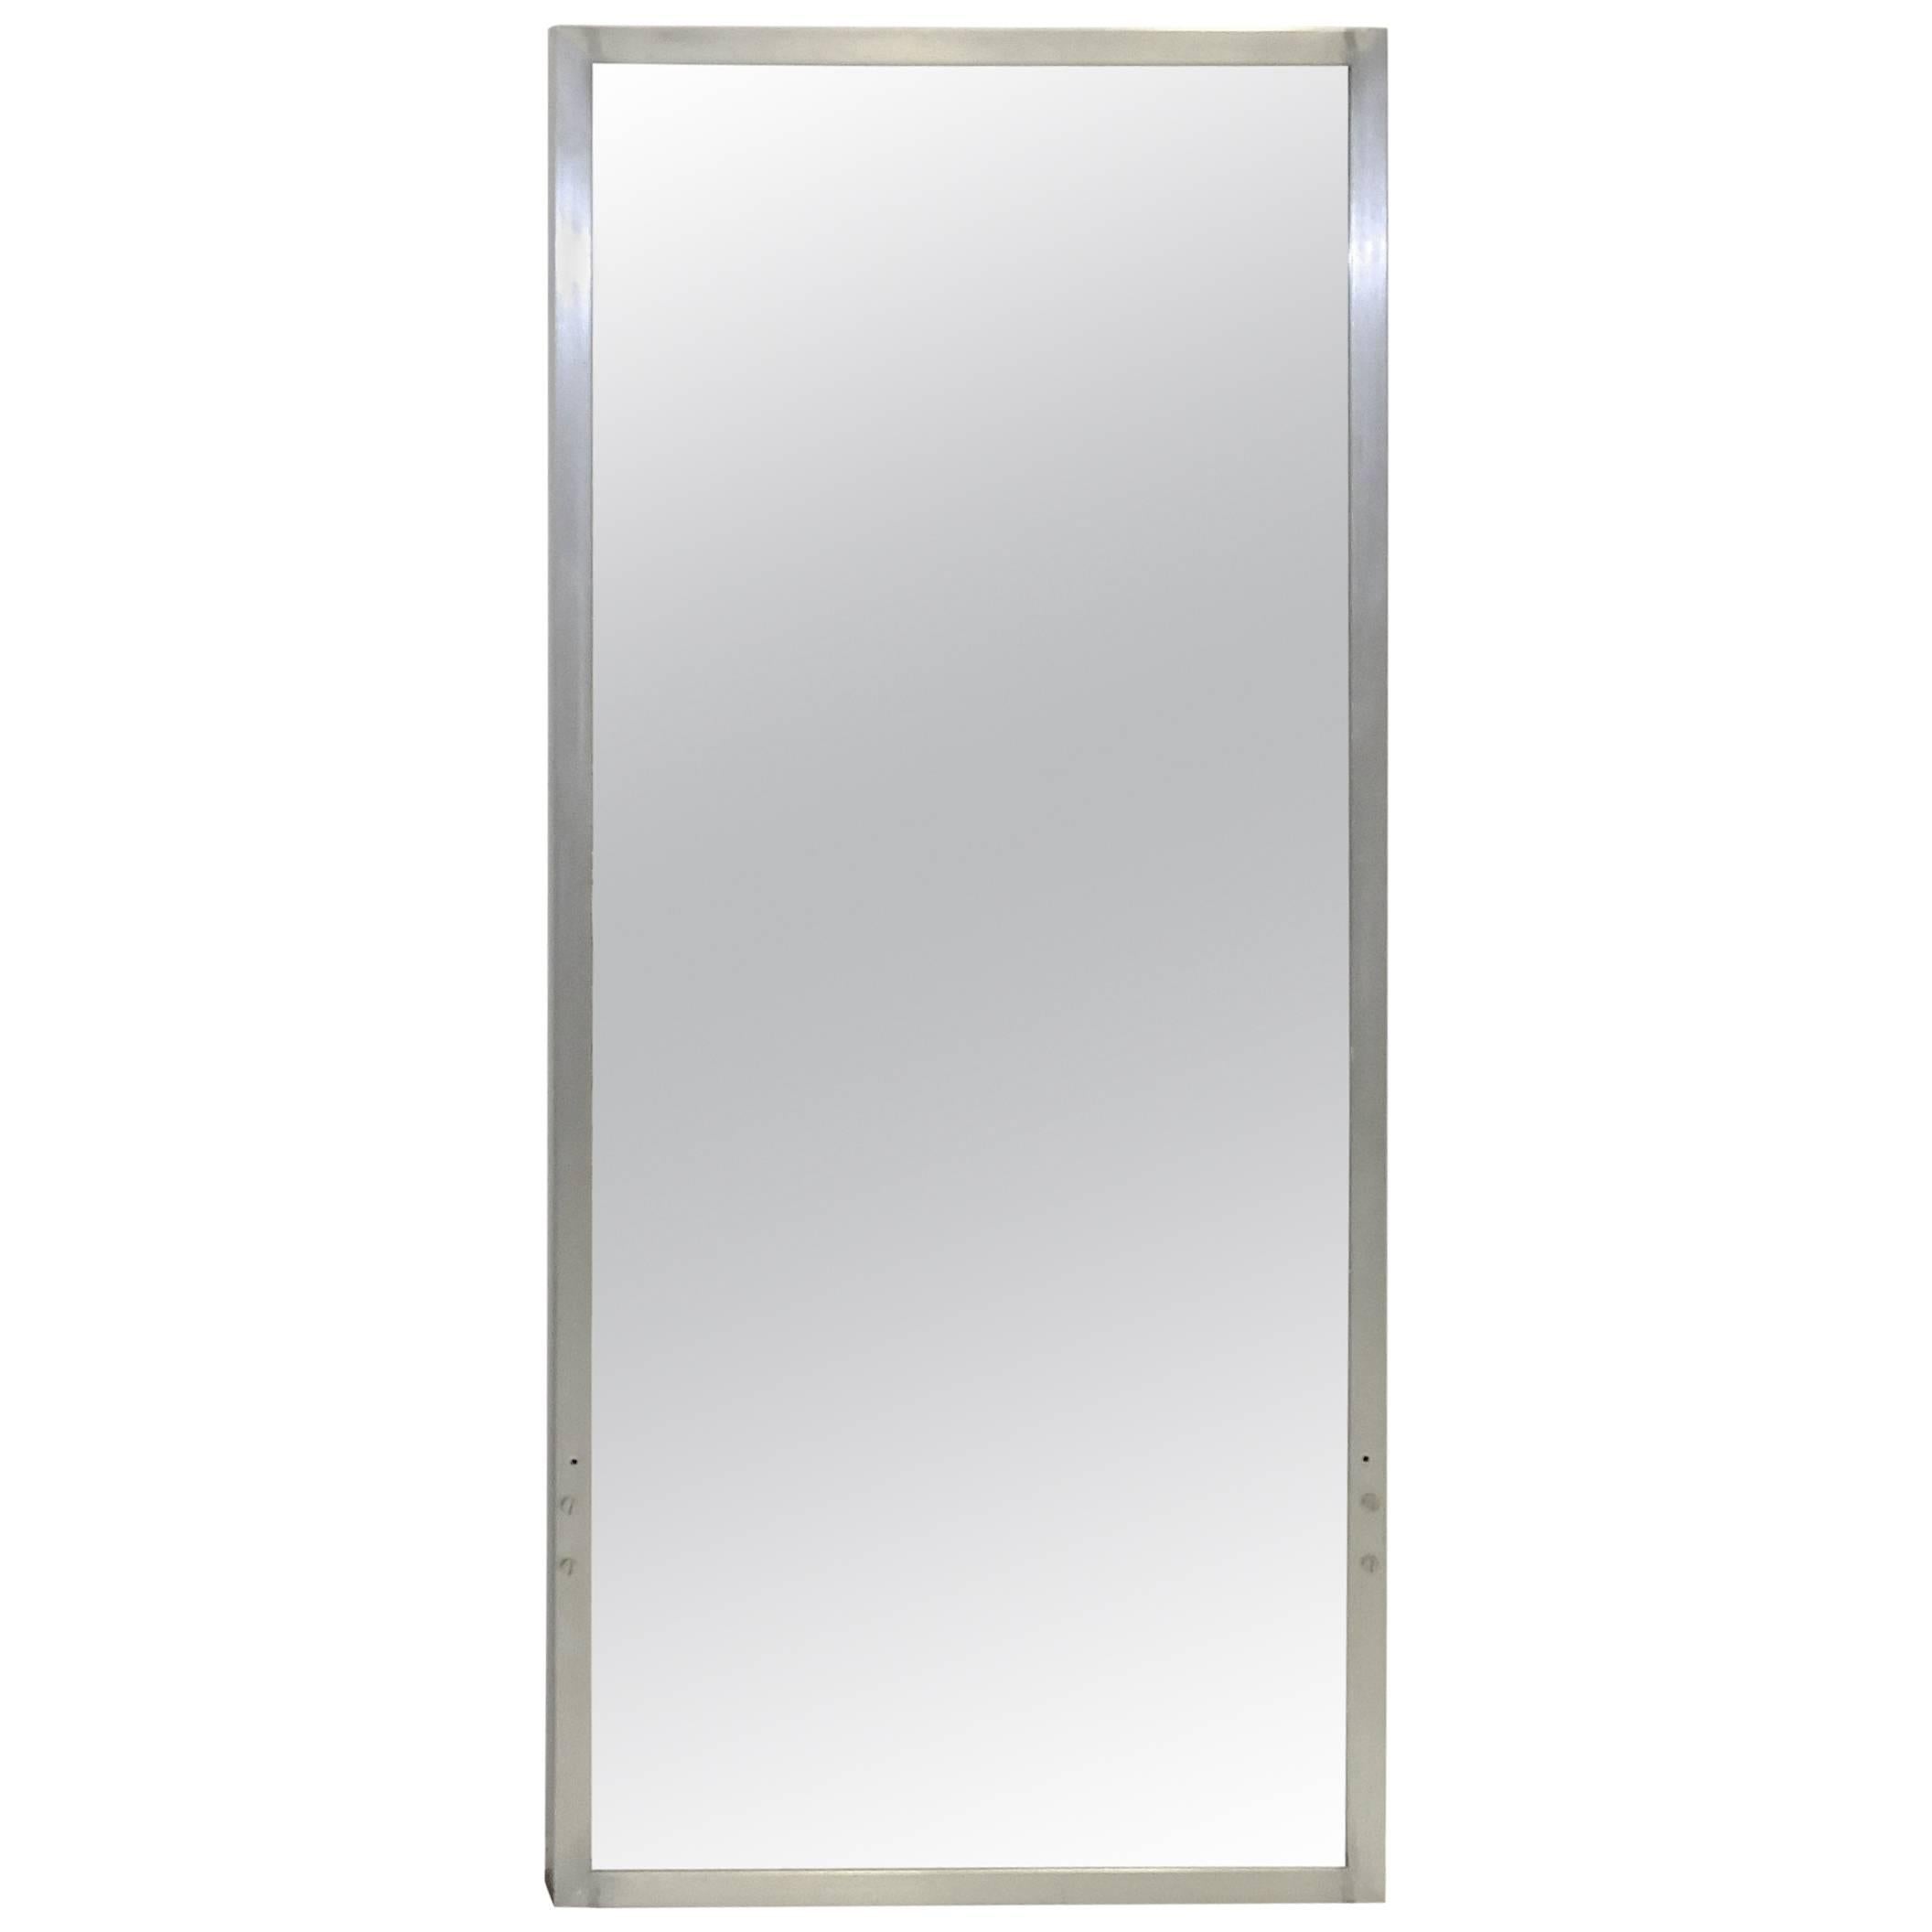 S.S. United States Wall Mirror with Aluminium Frame